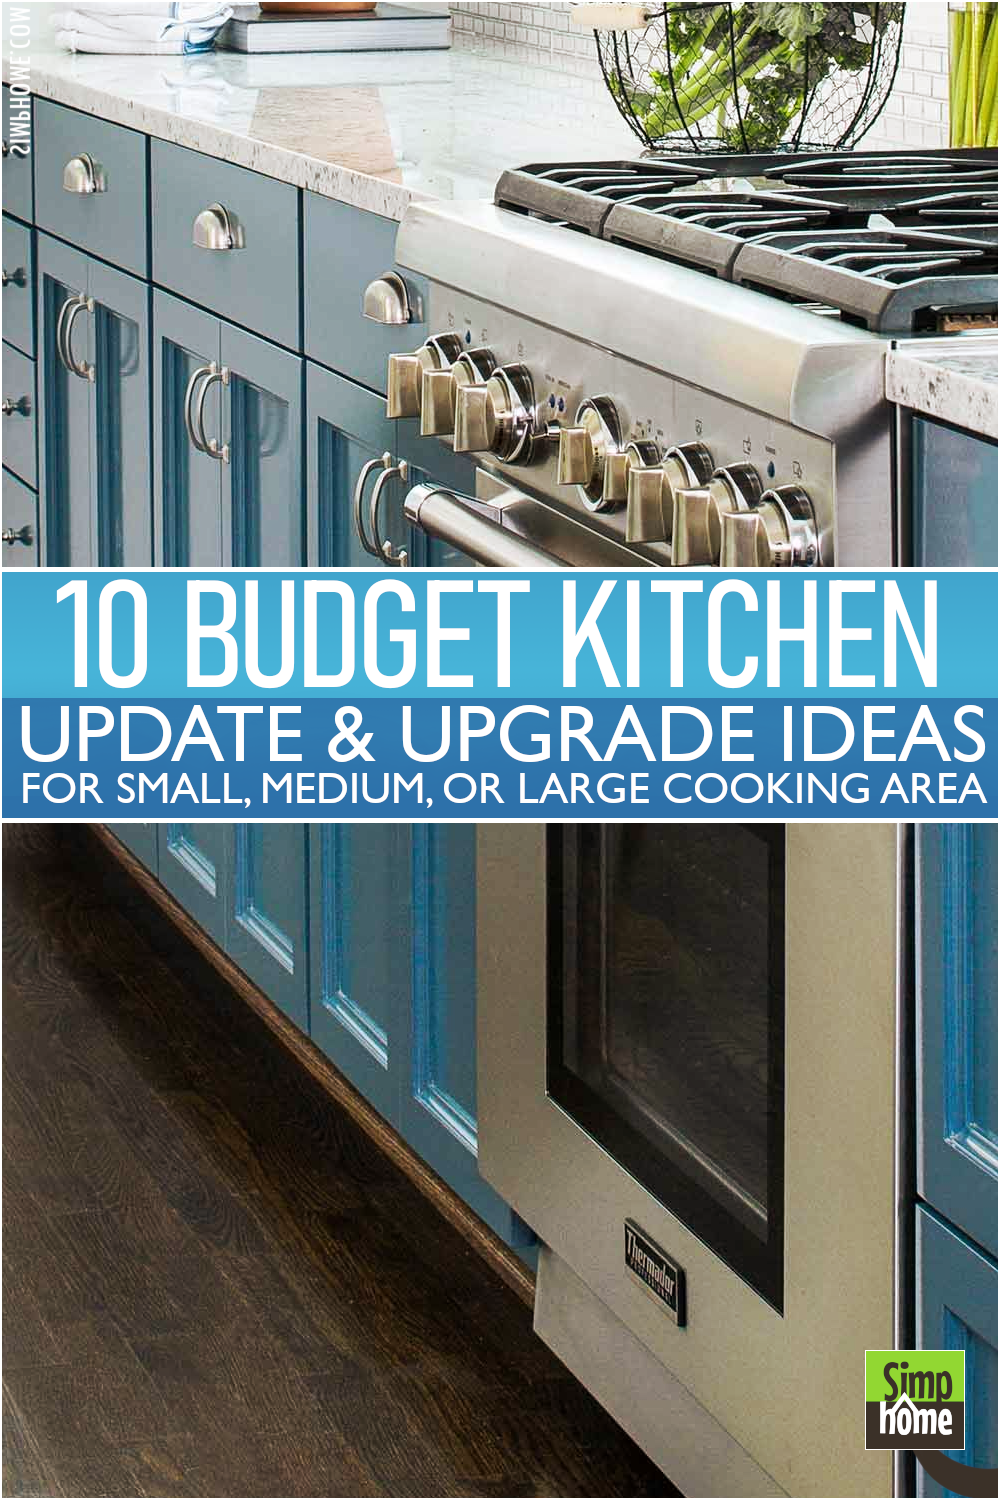 This is the 10 Budget Kitchen Updates (Small-Regular size kitchen)